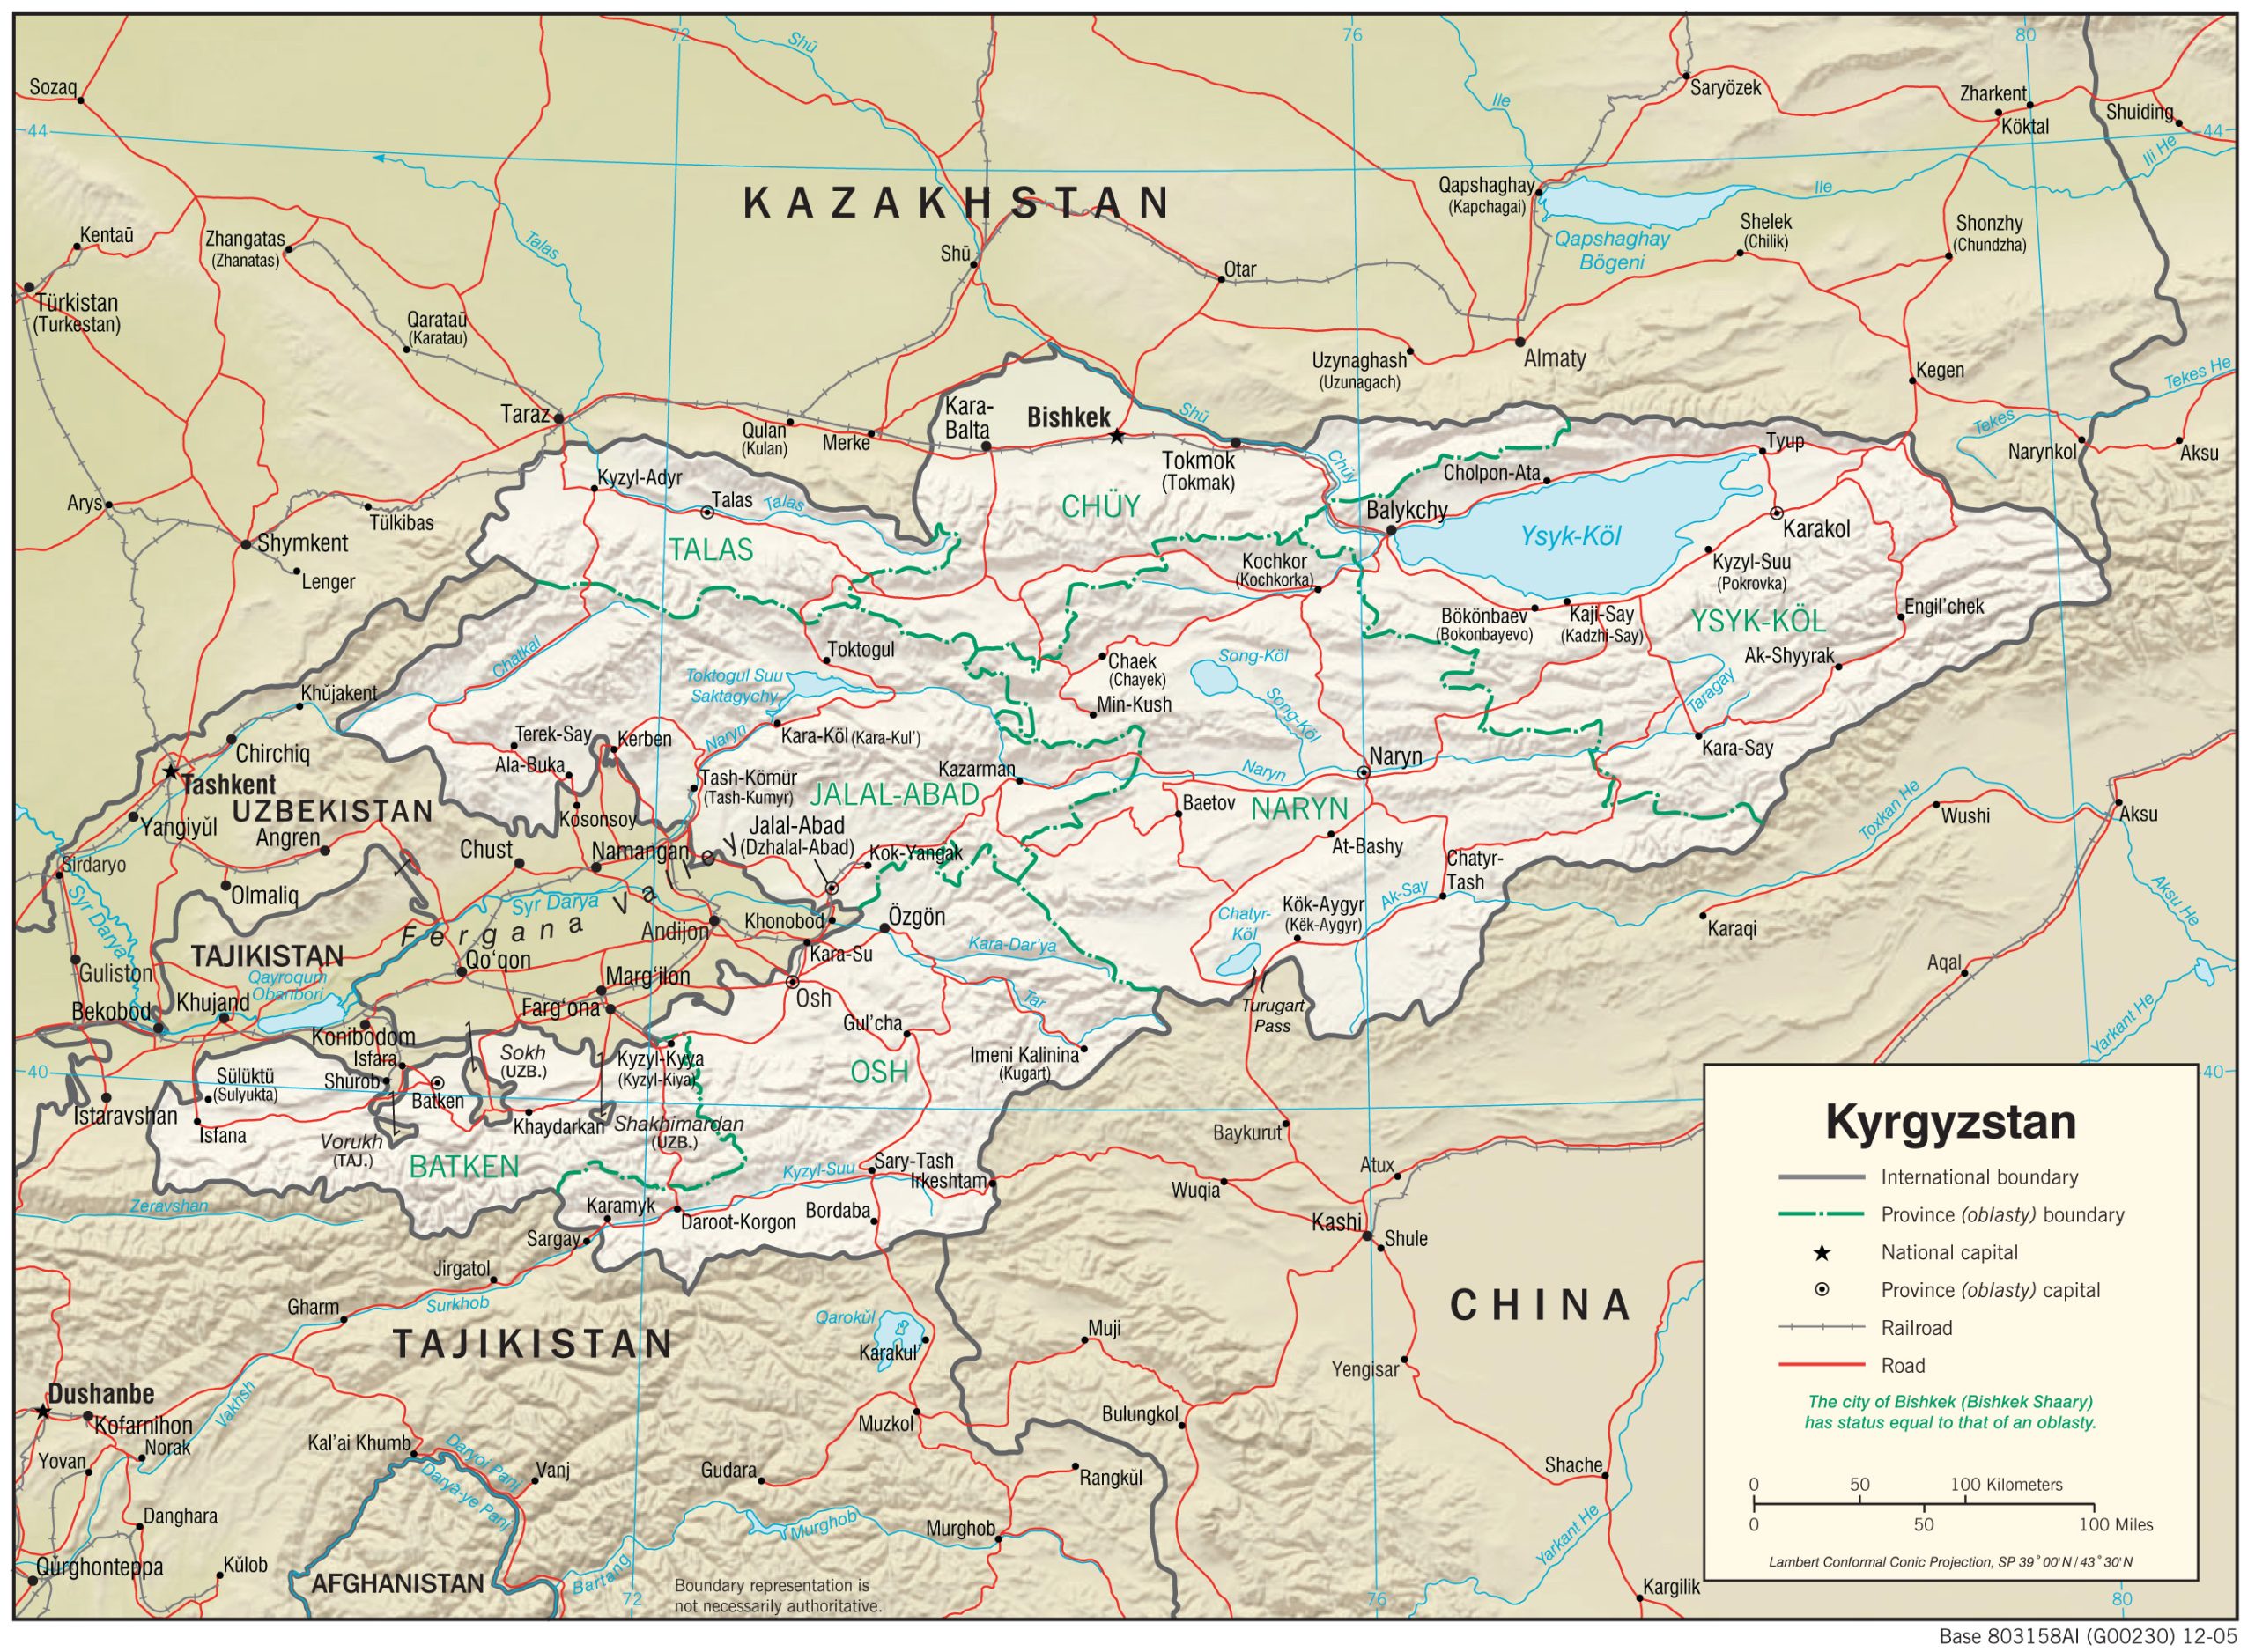 Detailed map of Kyrgyzstan